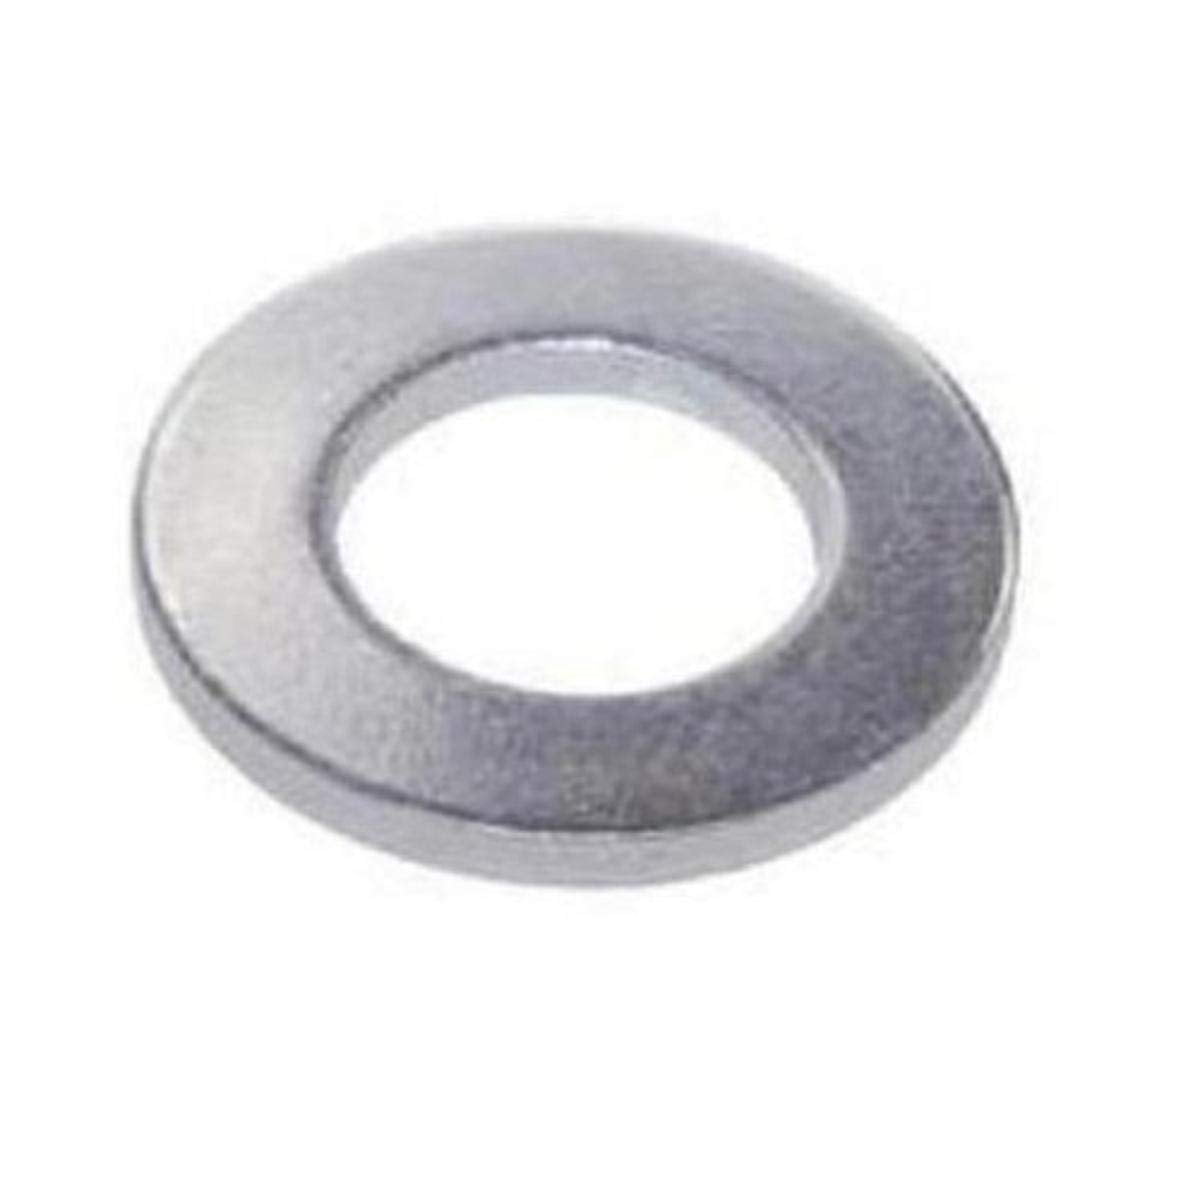 pack of 10 marine suitable 3/8 inch 316 Stainless steel flat washers 